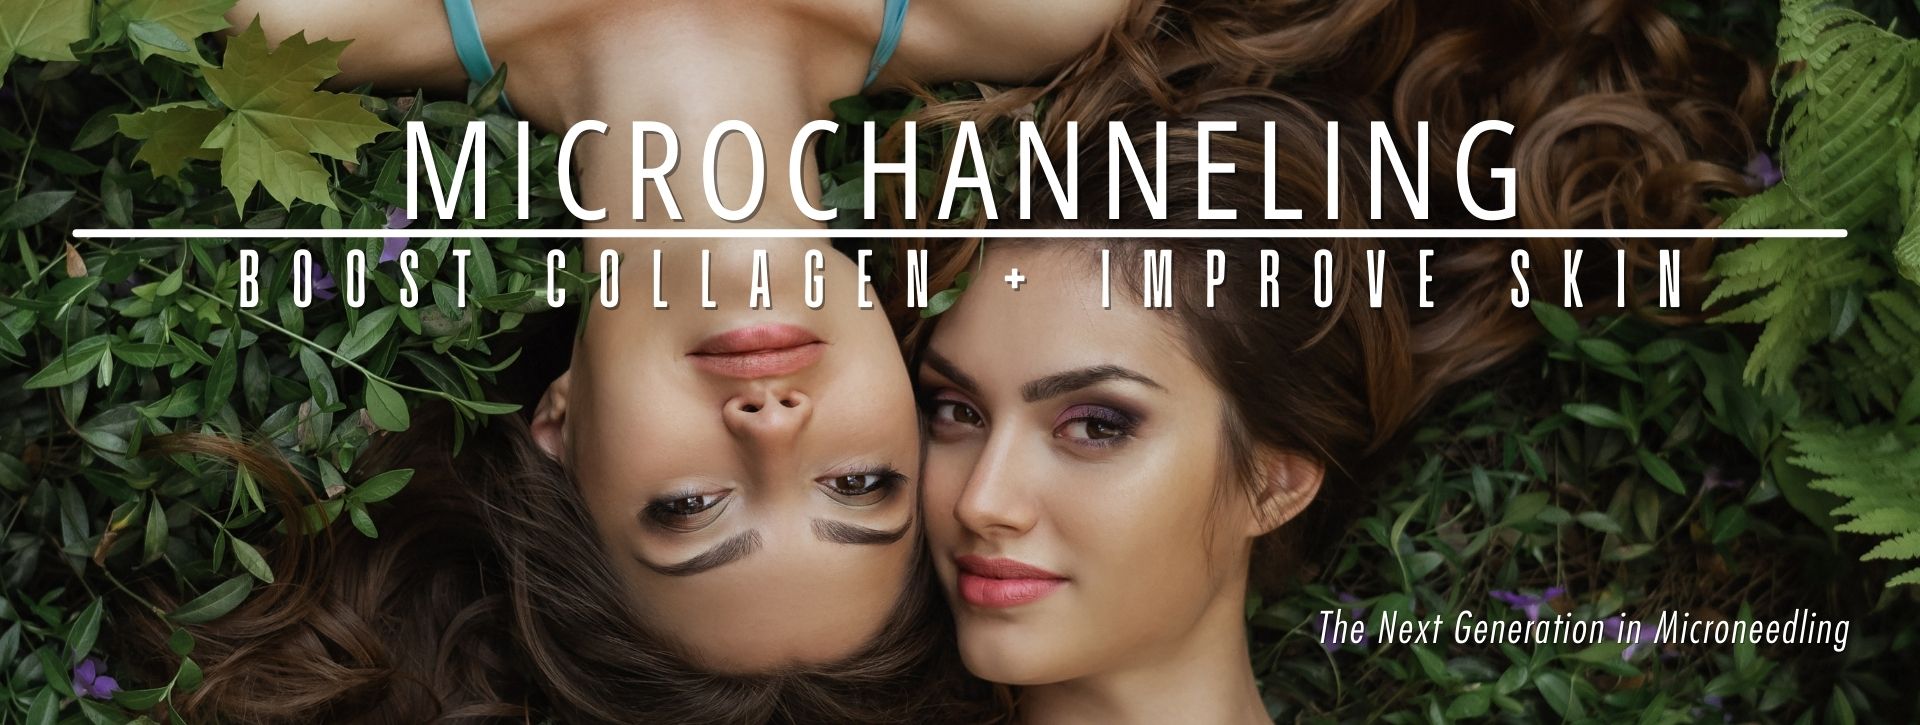 Microchanneling | Procell Facial Improves Skin & Boost Collagen